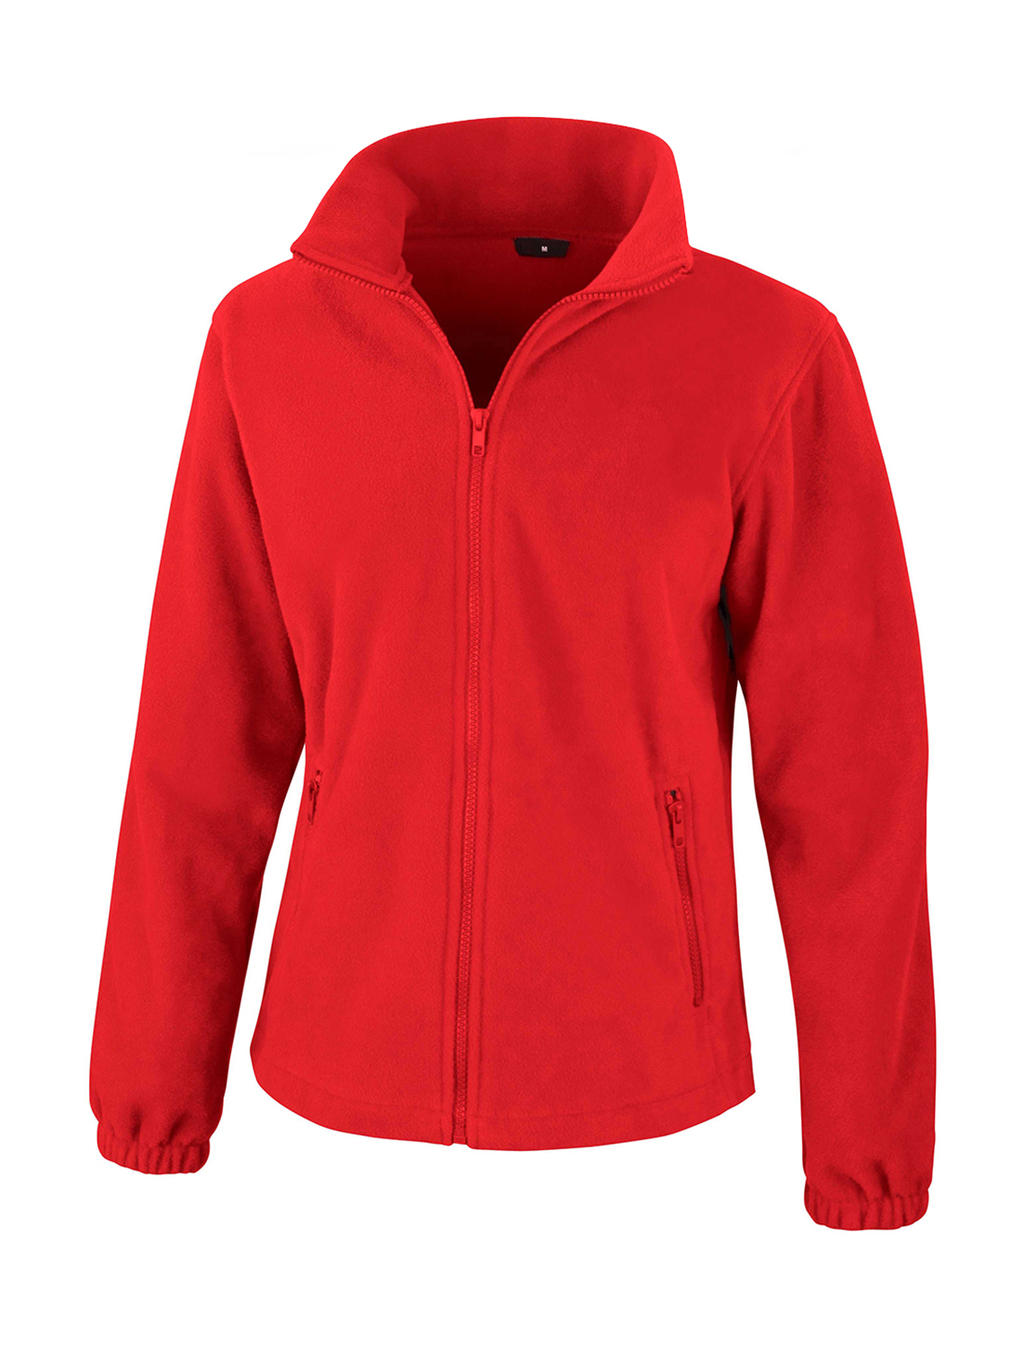  Womens Fashion Fit Outdoor Fleece in Farbe Flame Red